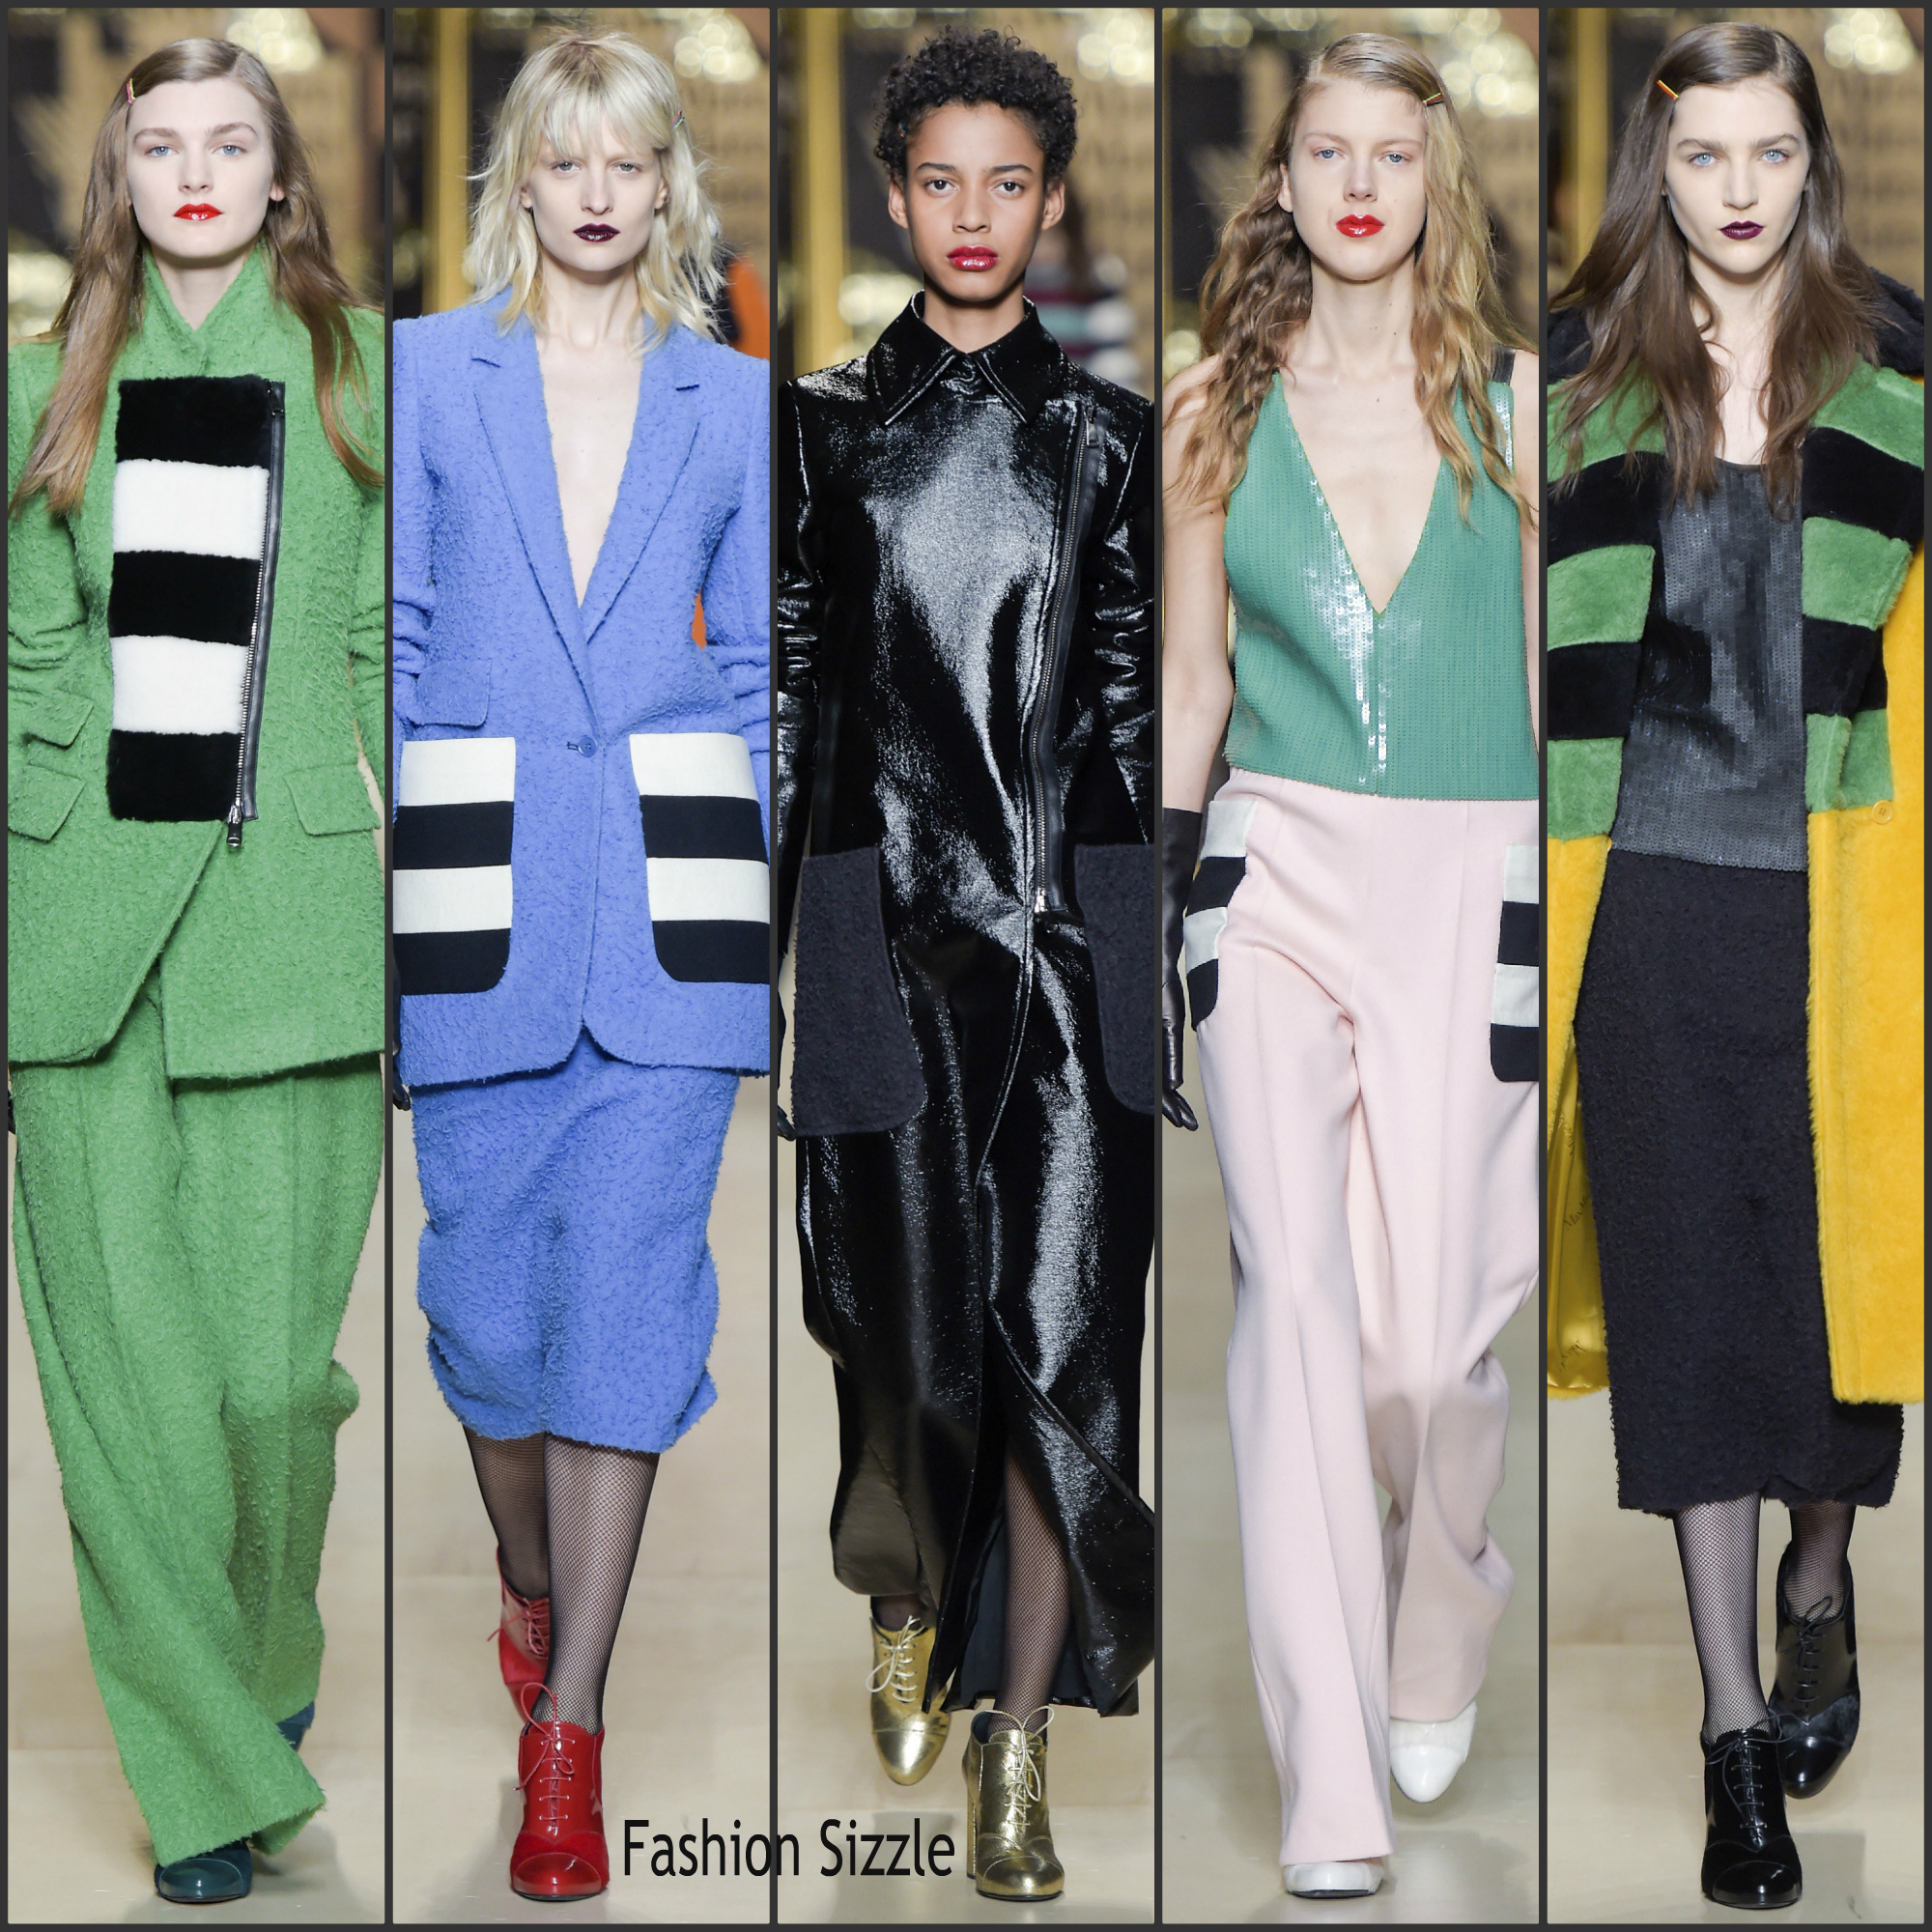 Max Mara Fall 2016 RTW MFW show featured Trench coats and Suits